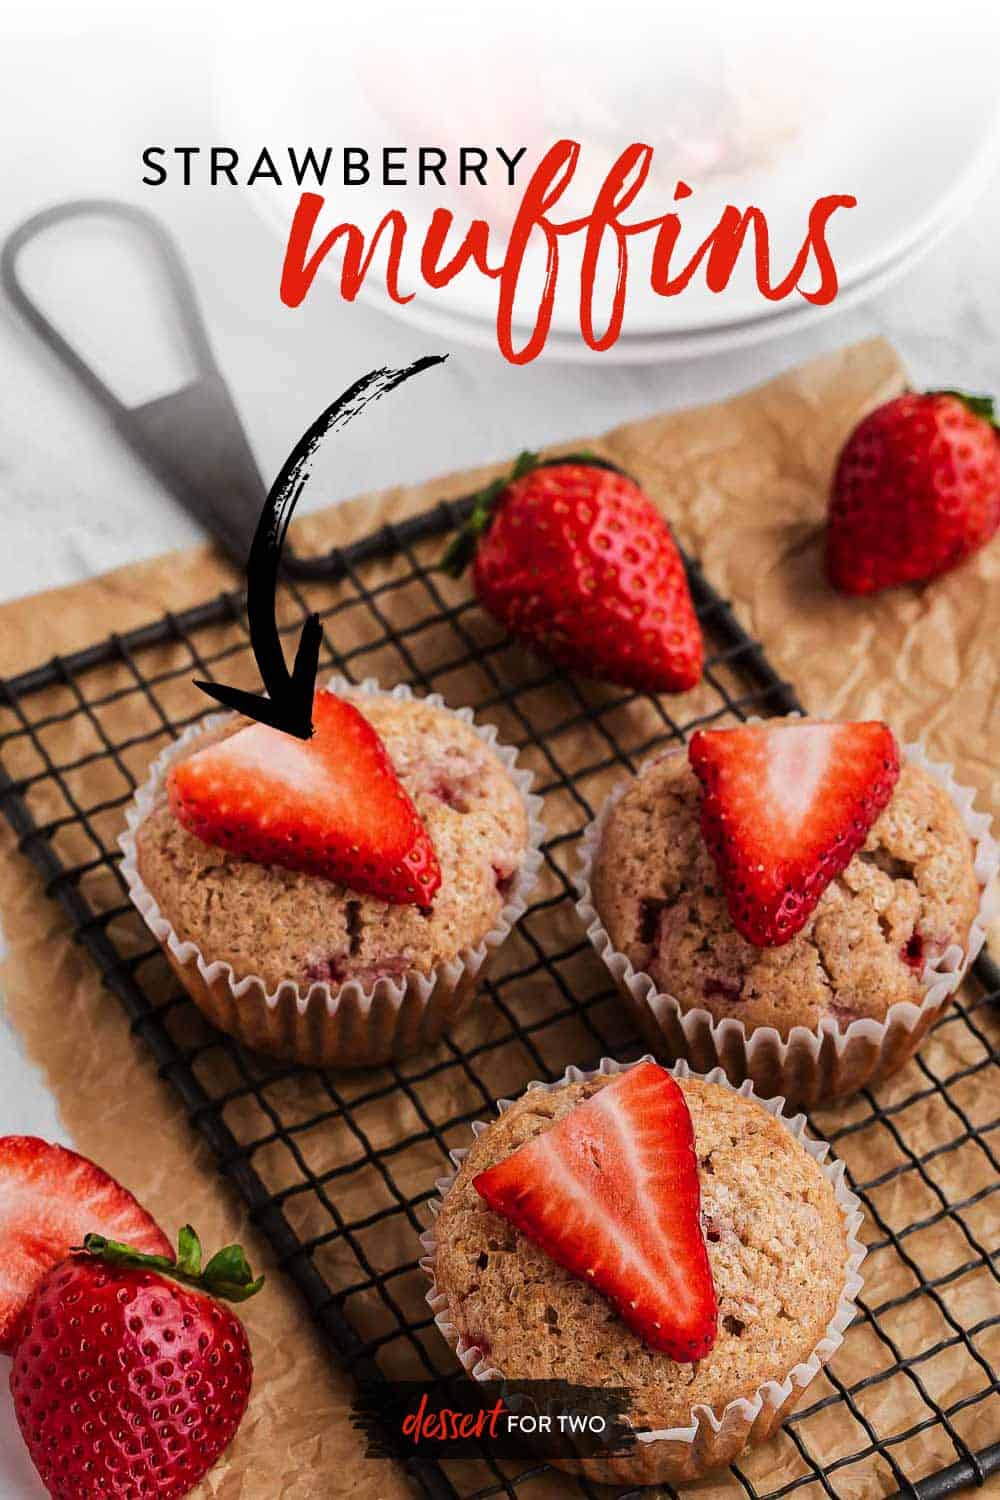 Three strawberry muffins on a wire rack with fresh berries on top.